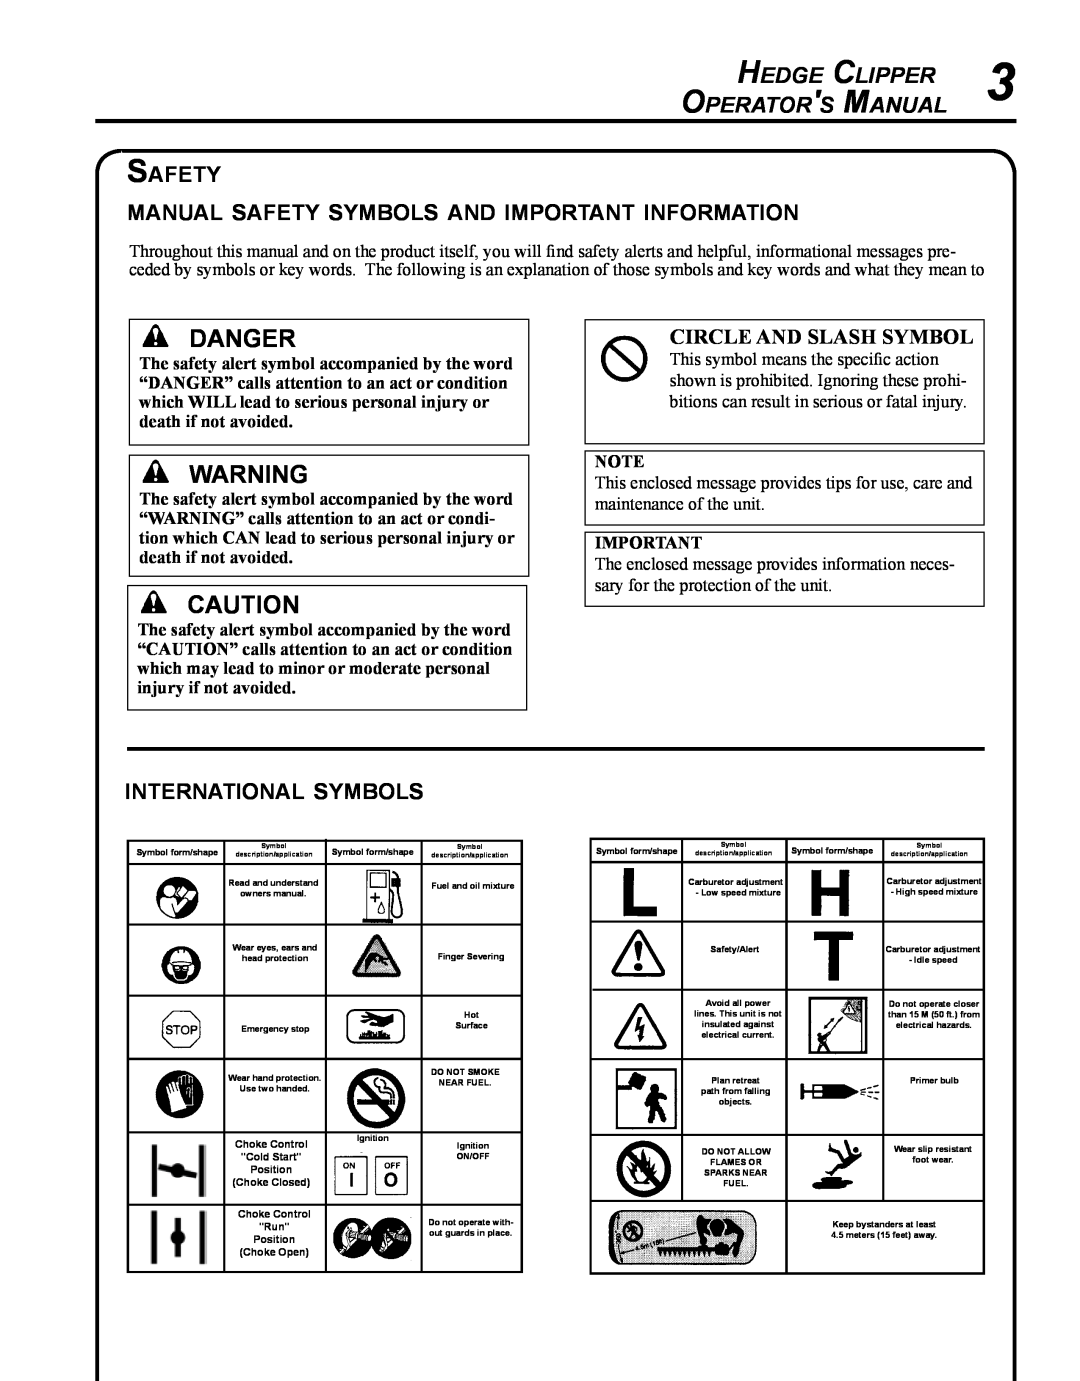 Echo HC-235 Danger, Hedge Clipper, Operator s Manual, Safety manual safety symbols and important information 